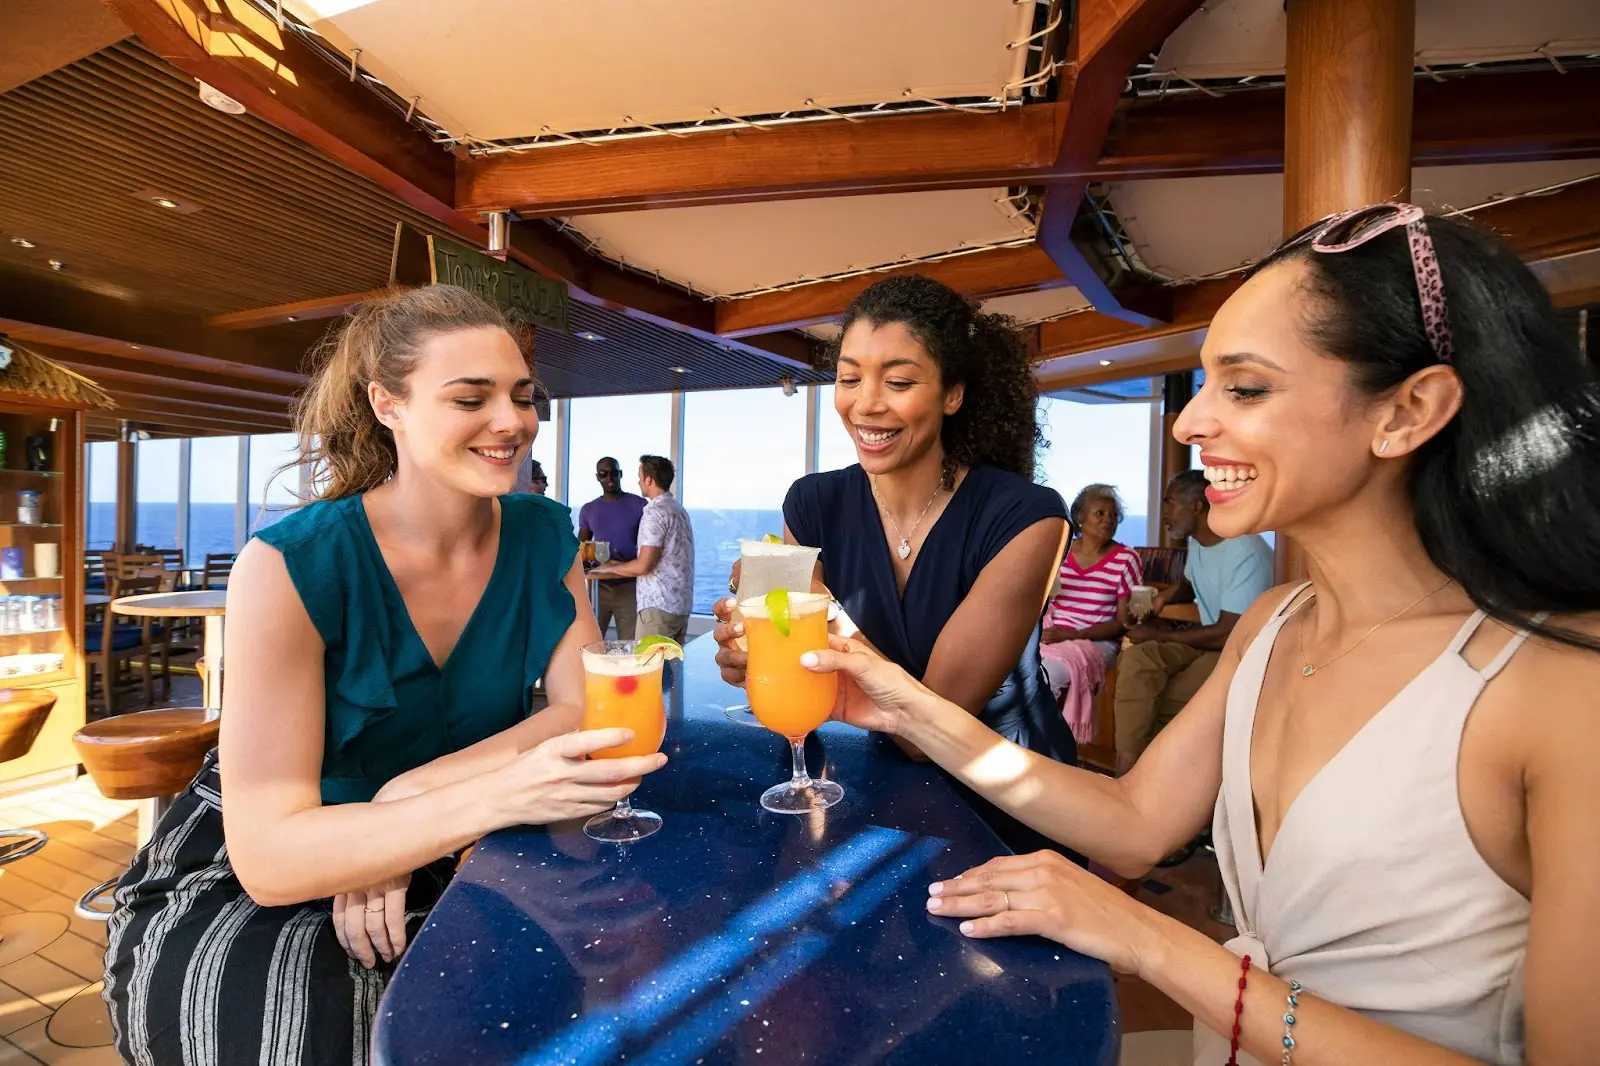 Guests on Carnival enjoying drinks